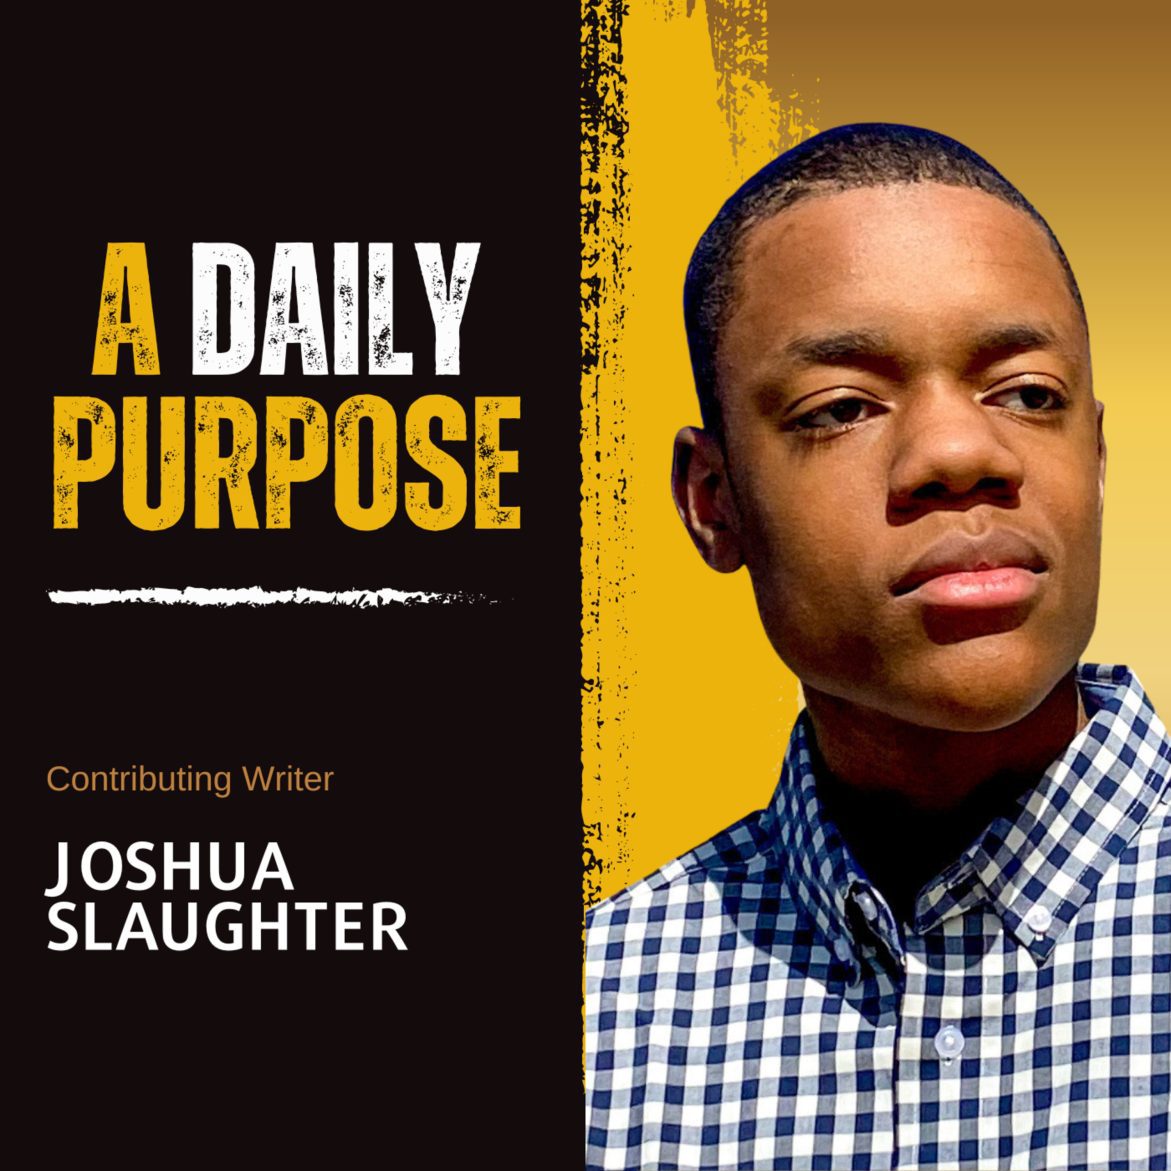 Black Podcasting - Day 207 Trust In Who? by Joshua Slaughter